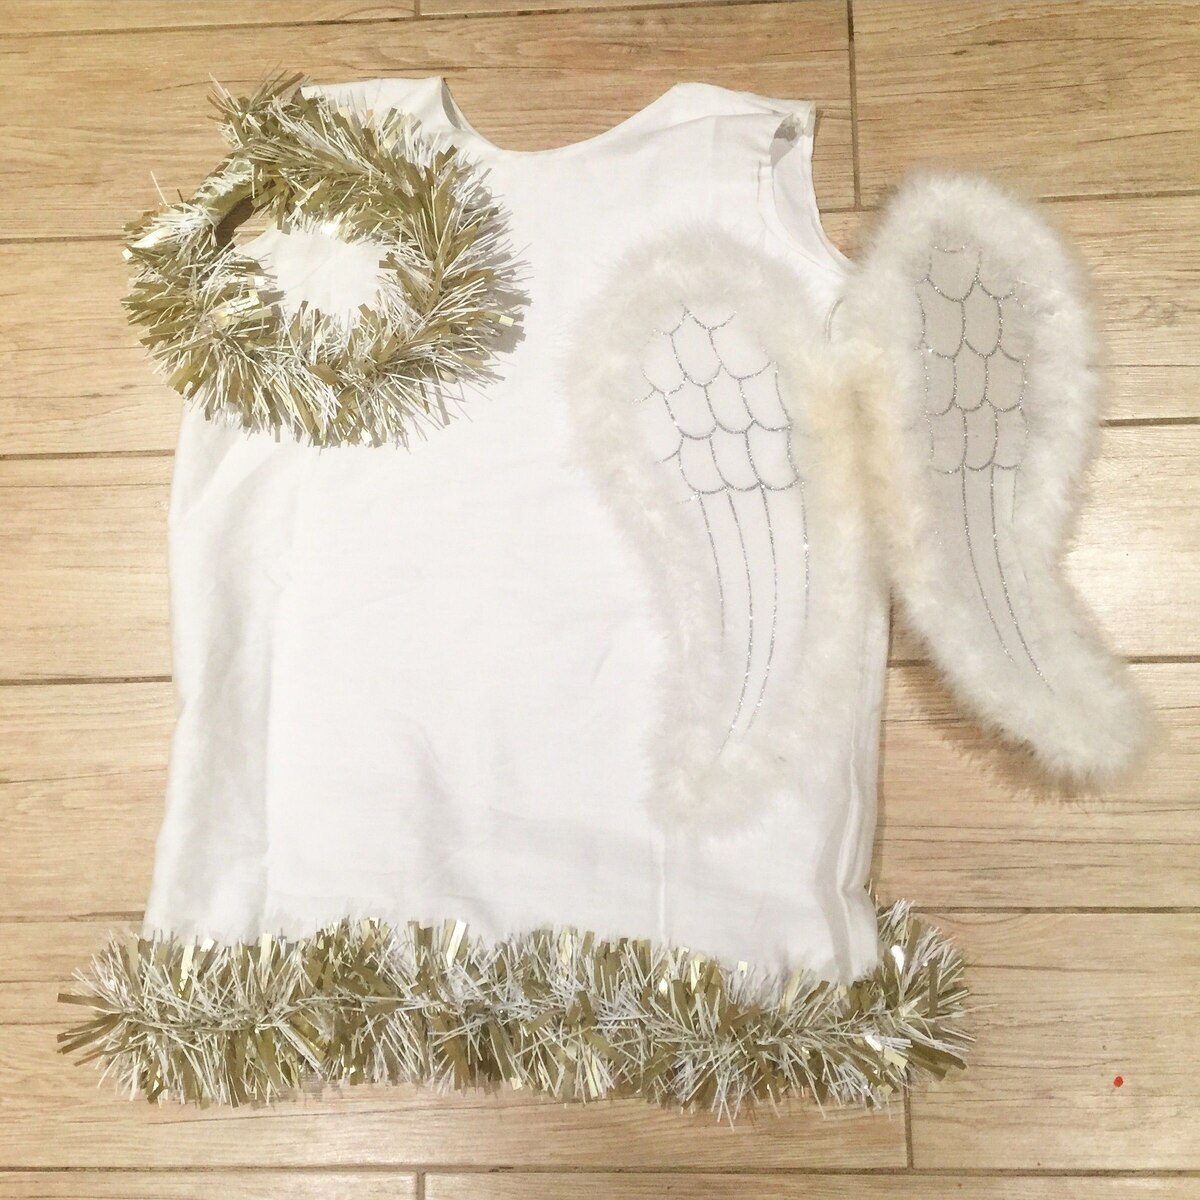 How To Make An Angel Costume From A Pillowcase